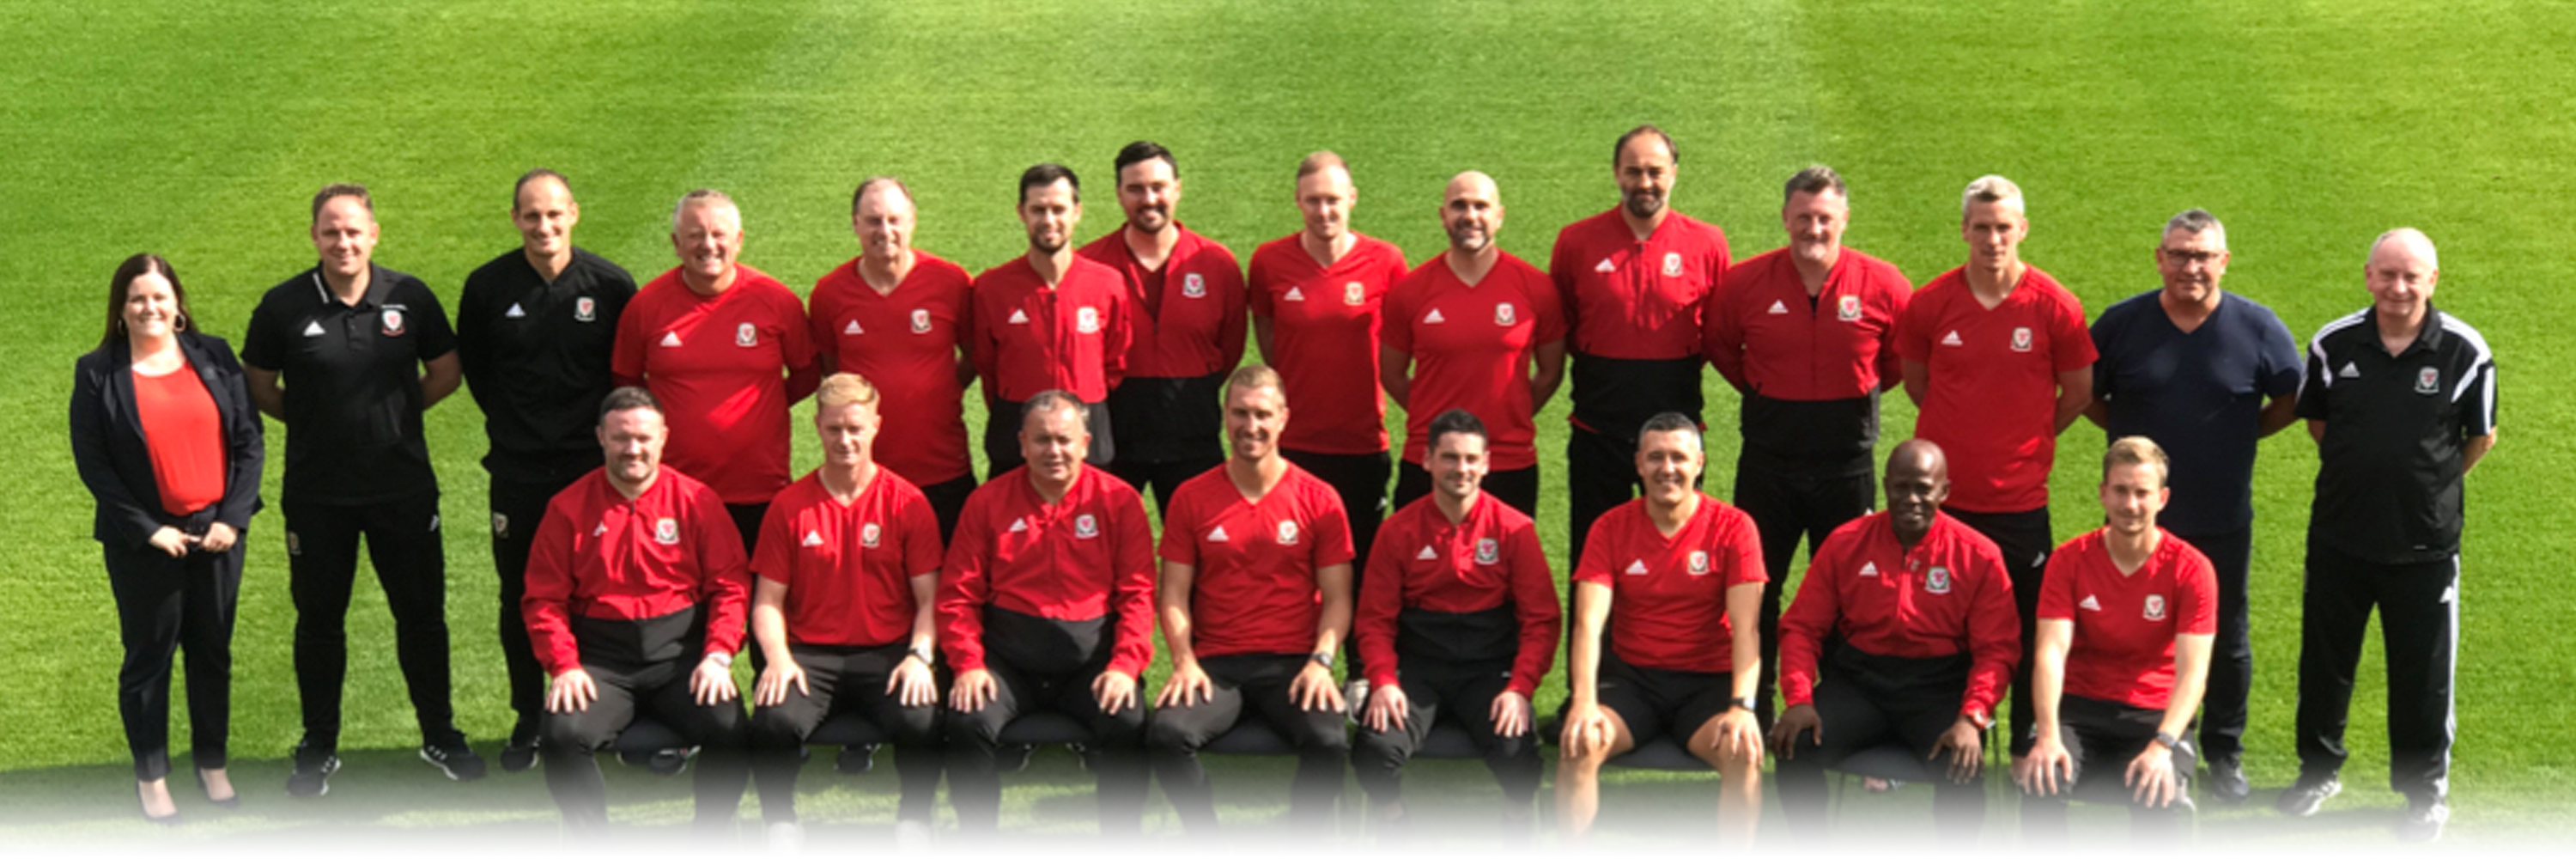 Catton becomes third UEFA Pro Licence holder at Deeside